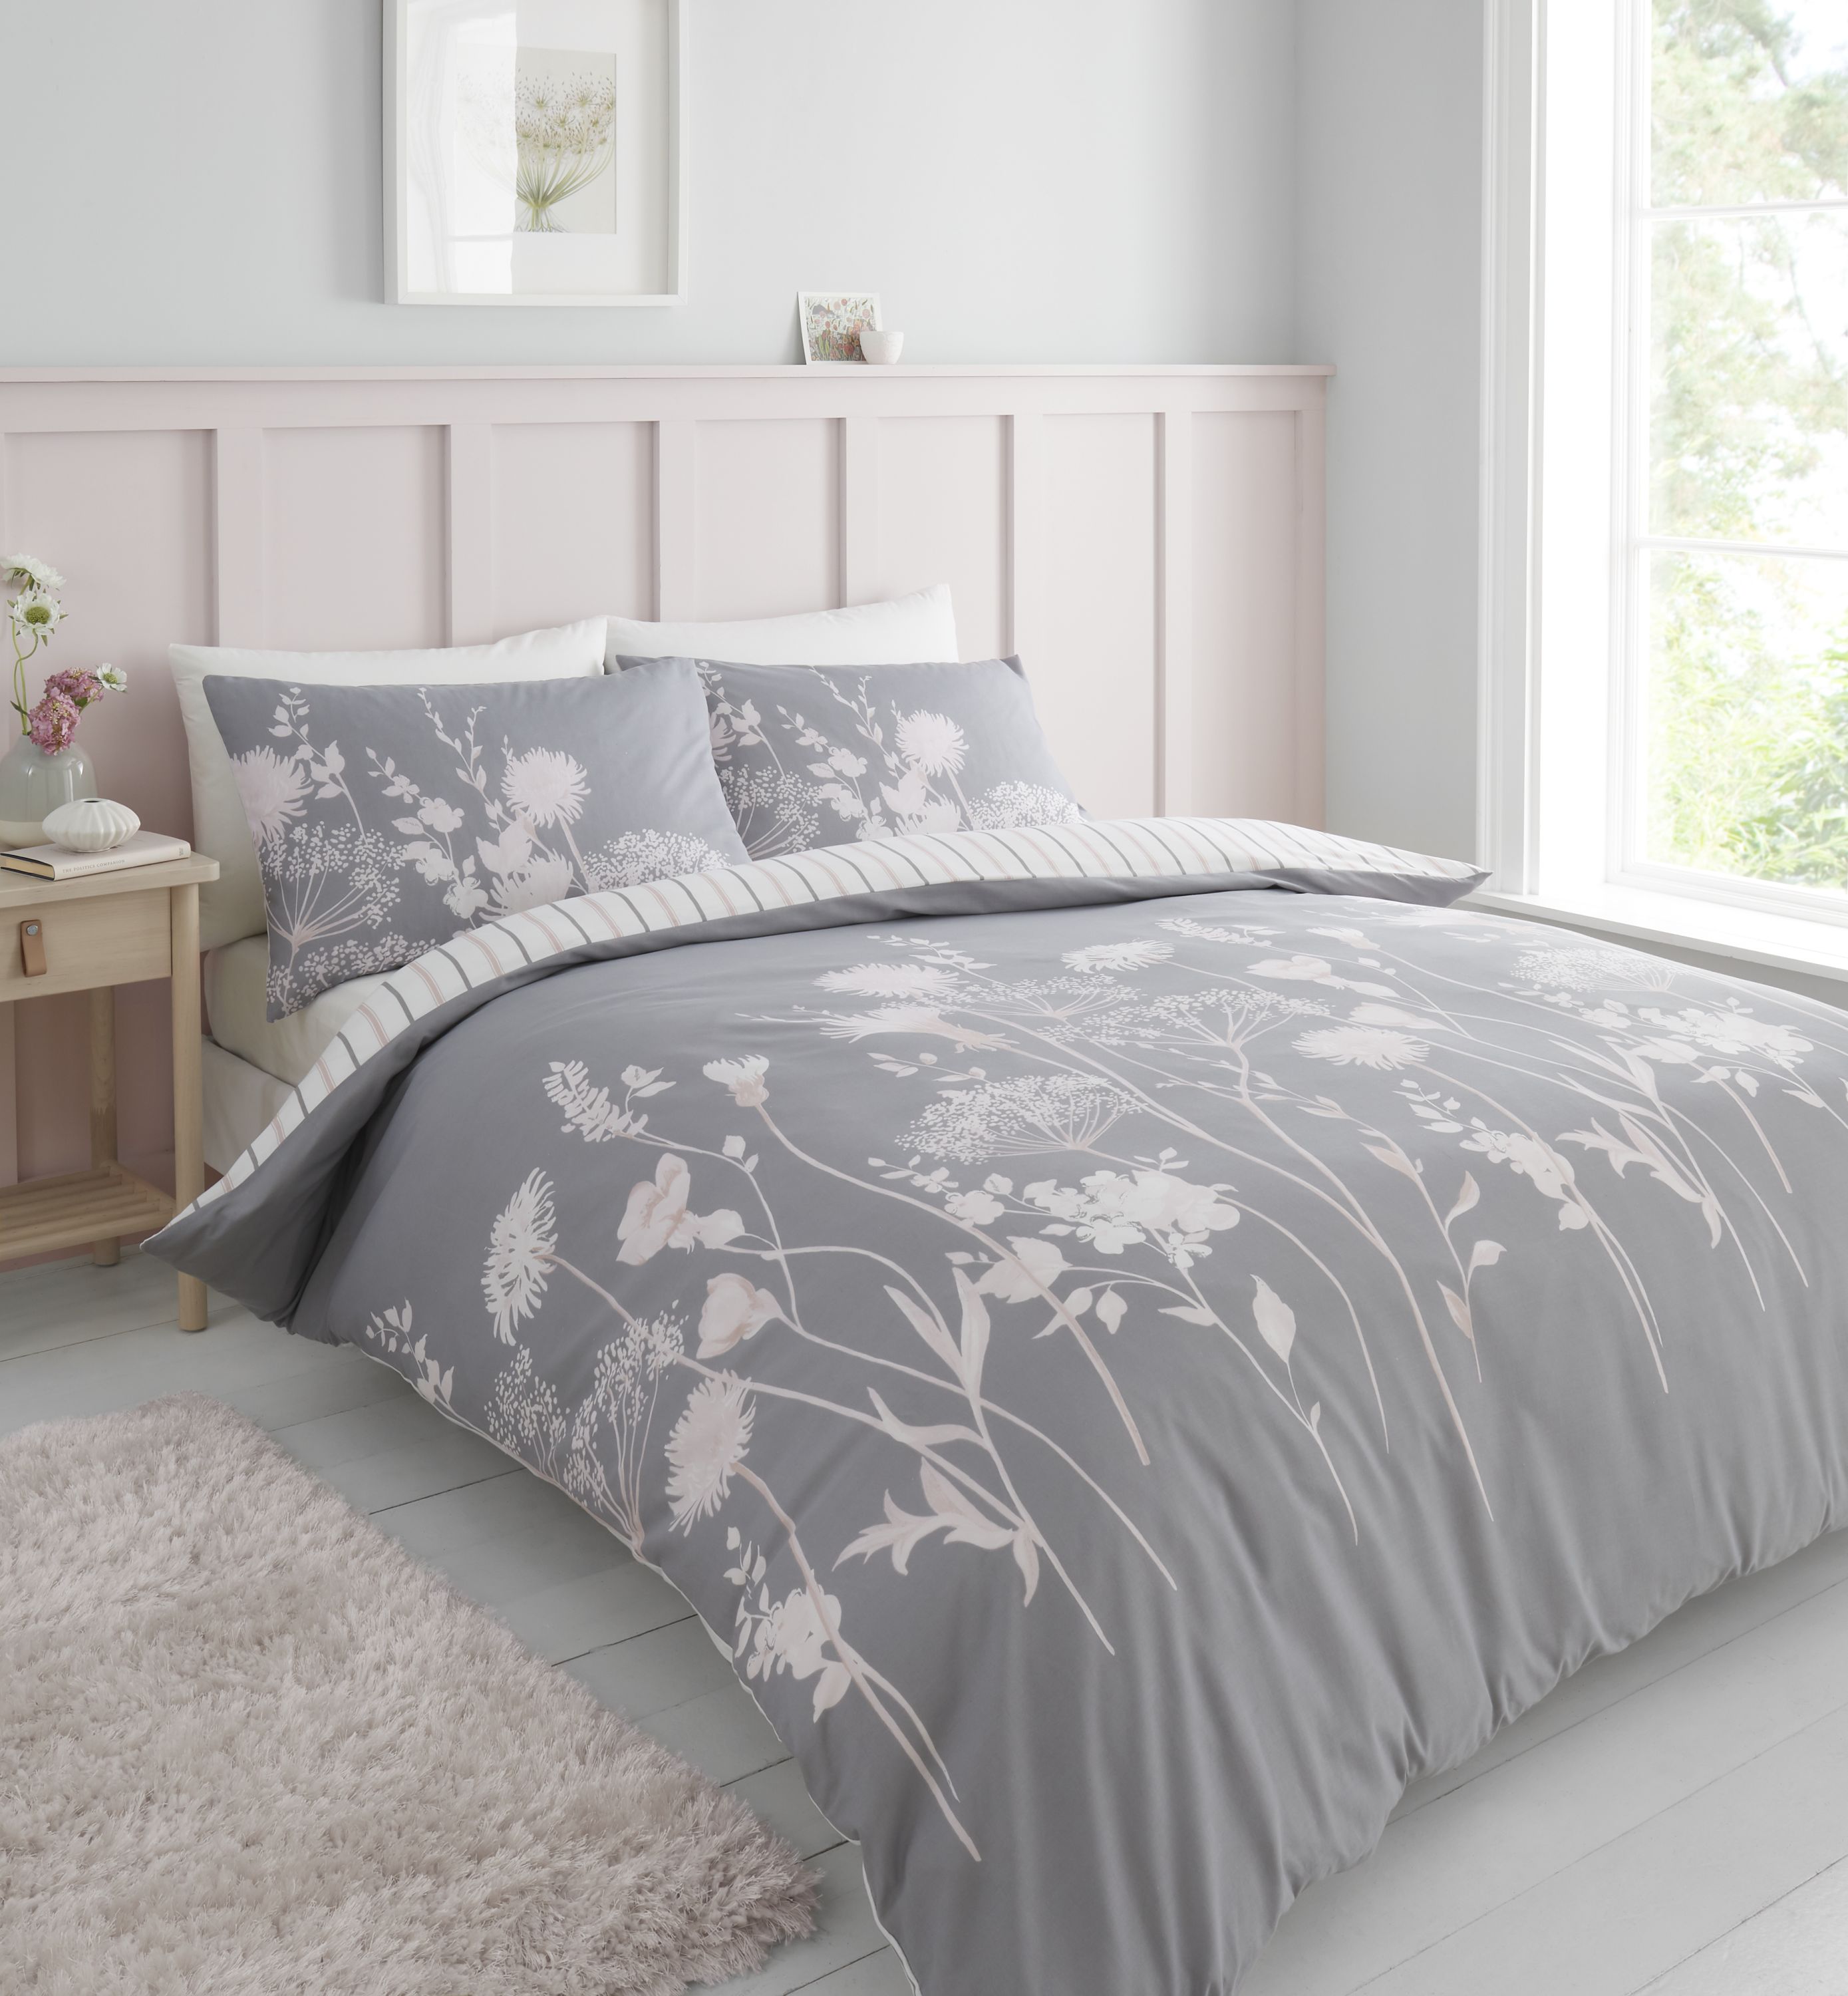 Catherine Lansfield Meadowsweet Floral Pink Duvet Cover and Pillowcase Set